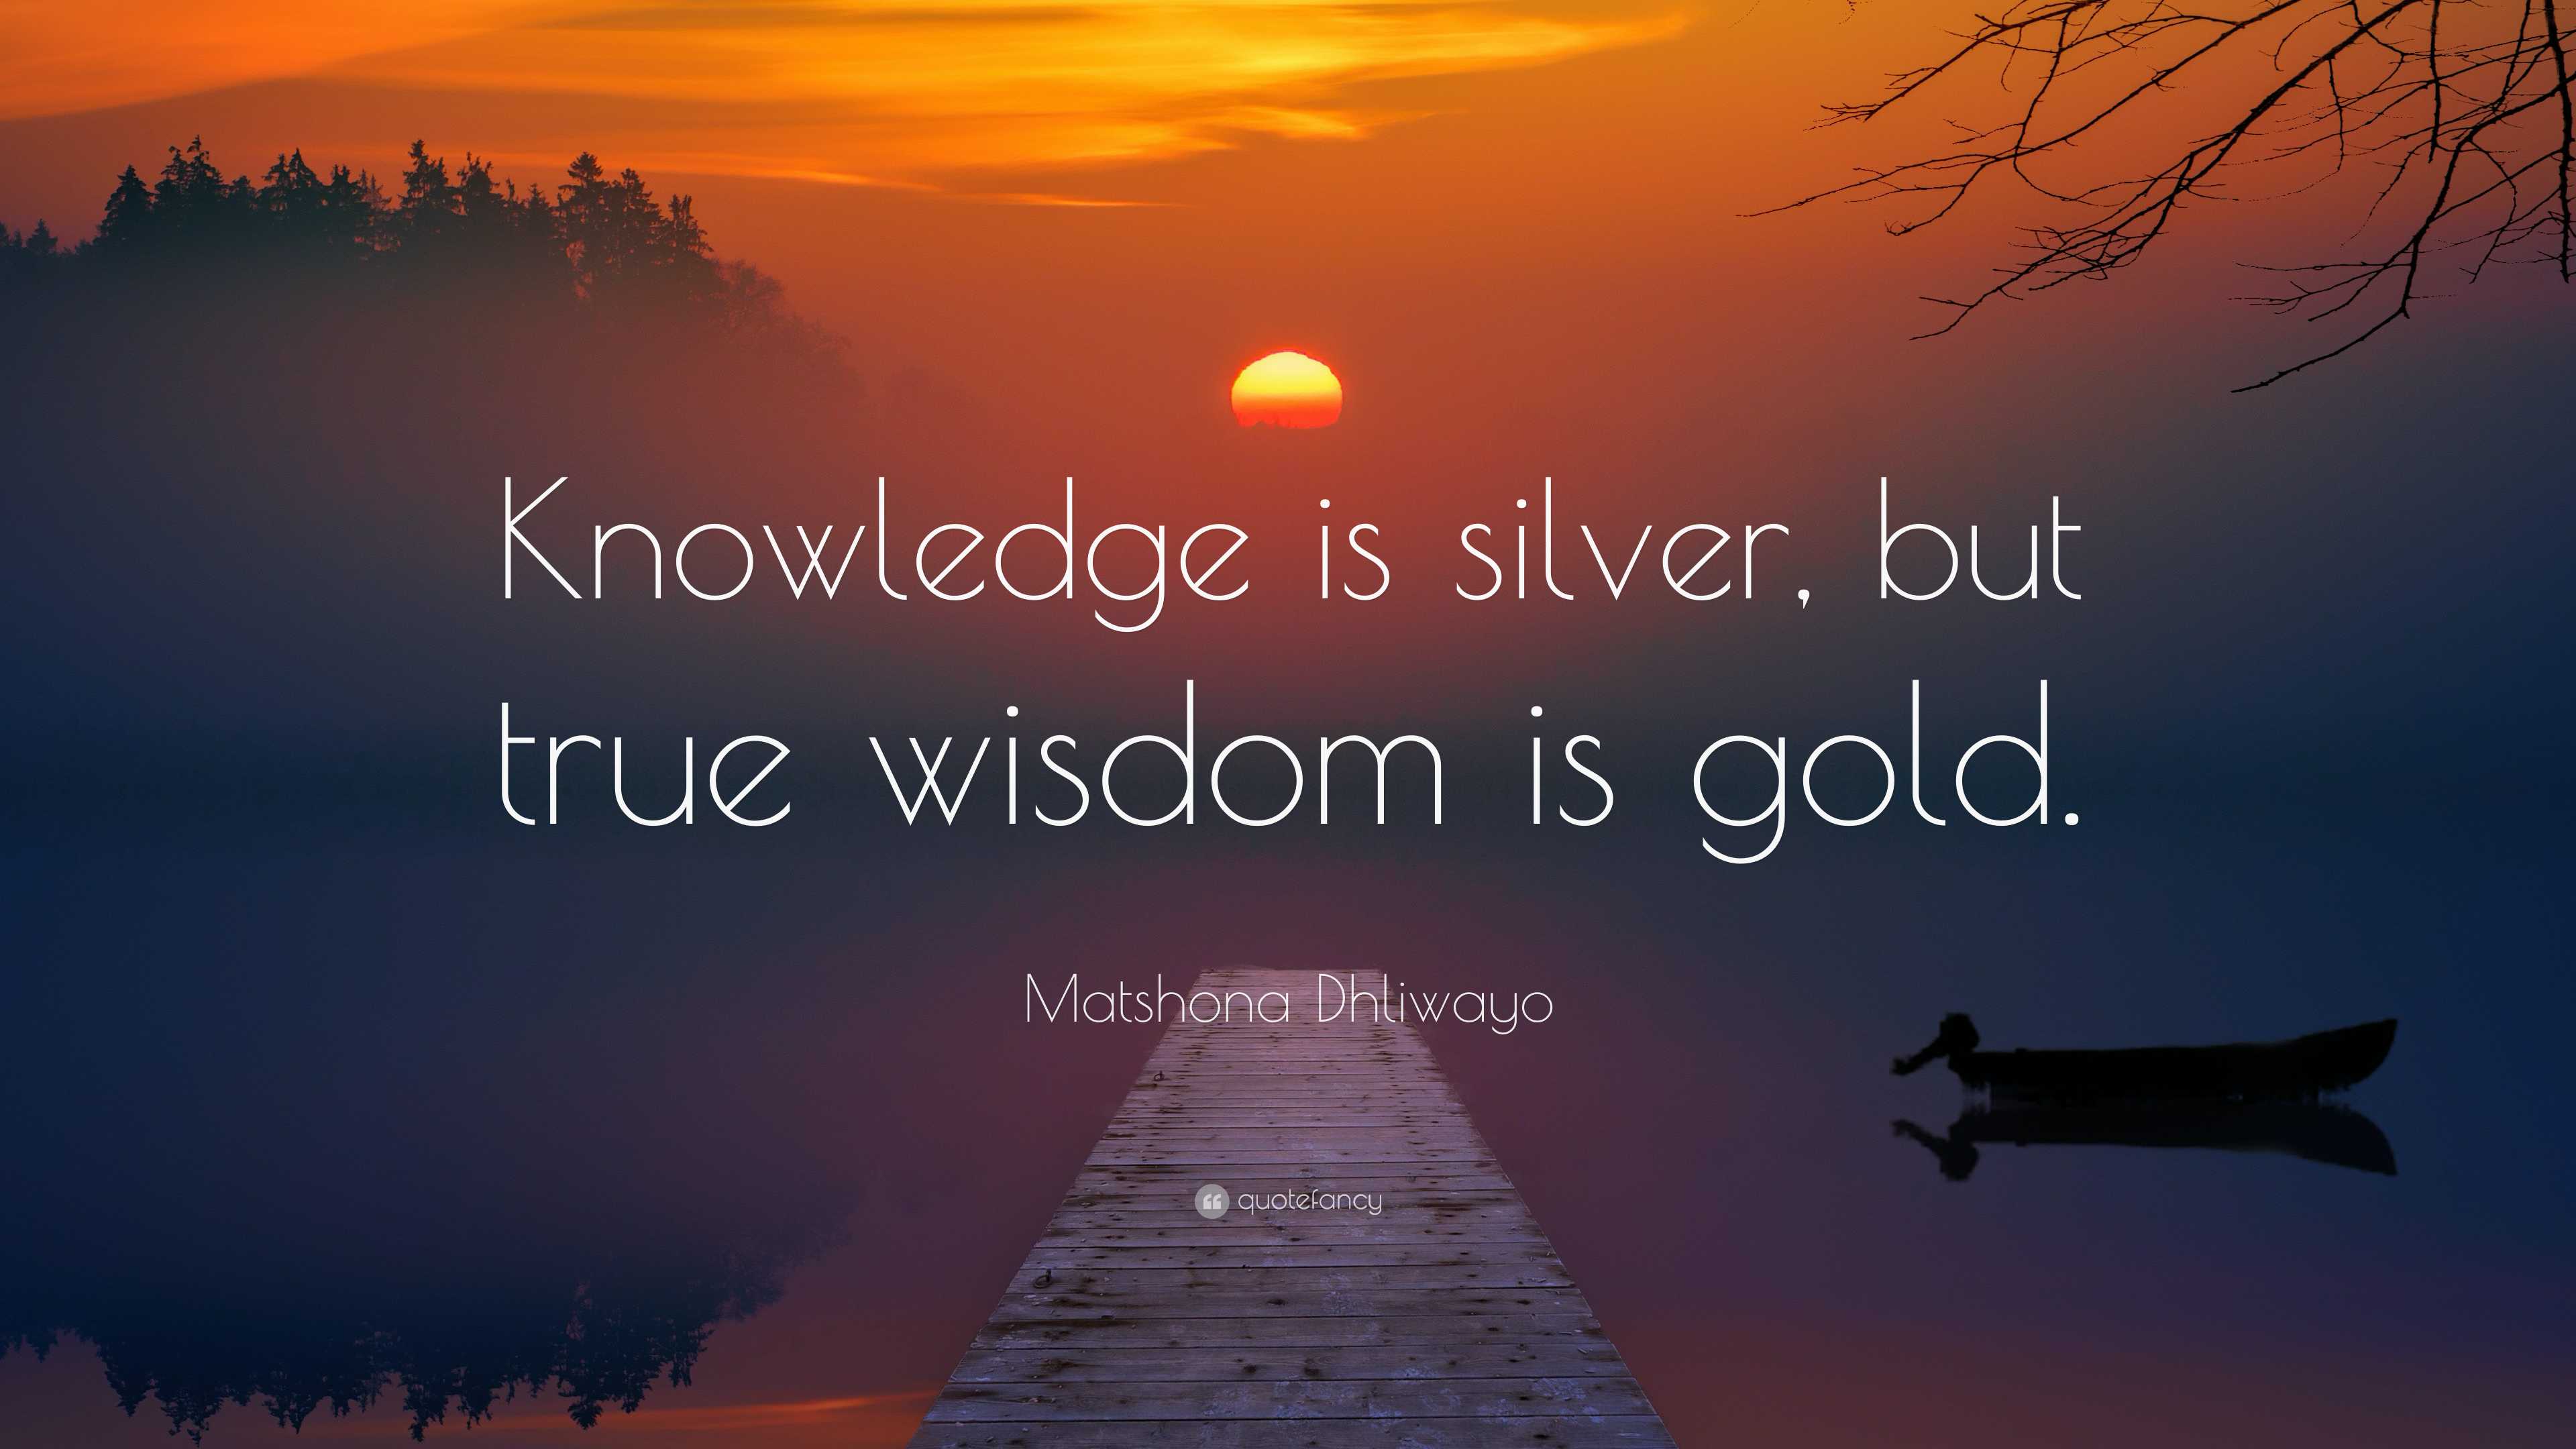 Matshona Dhliwayo Quote: “Knowledge is silver, but true wisdom is gold.”